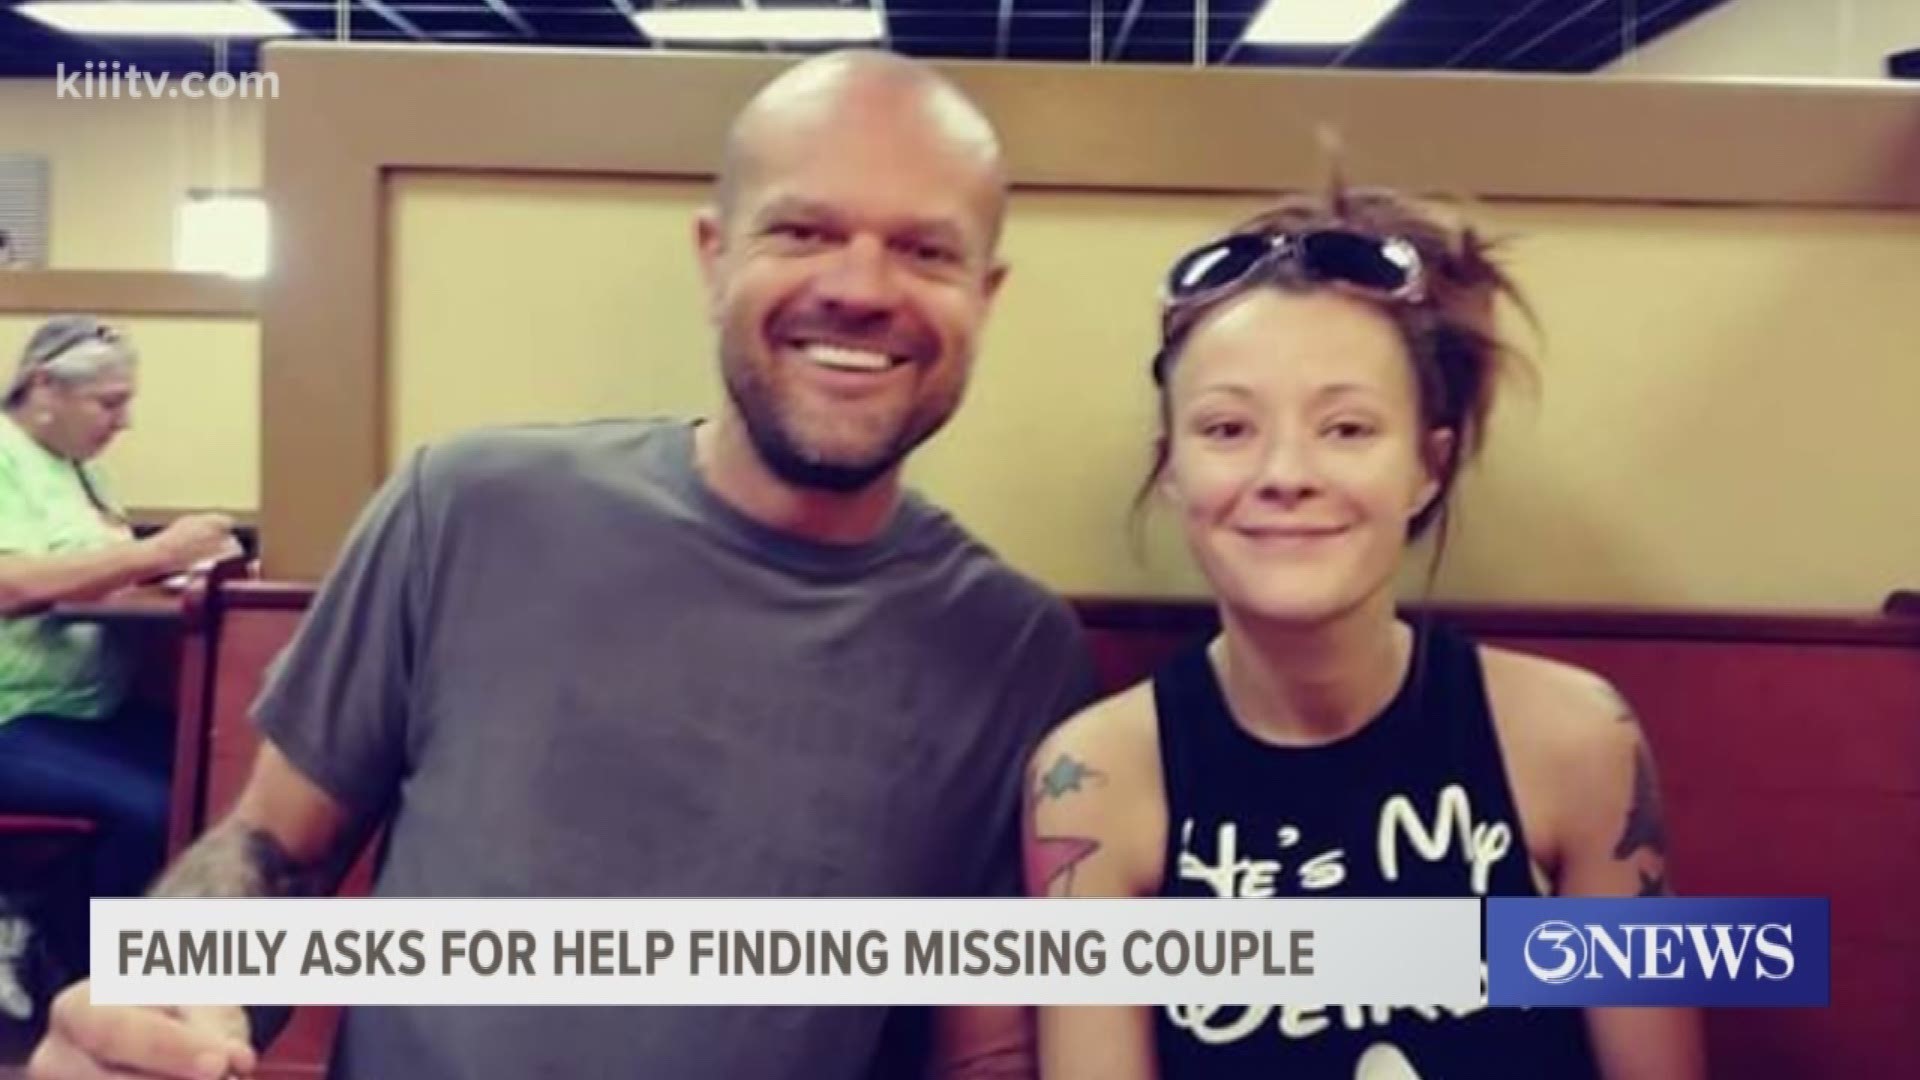 Tammy Arthur and Chad Peters were living in Corpus Christi but were reported missing November 2018 in the Laredo area.